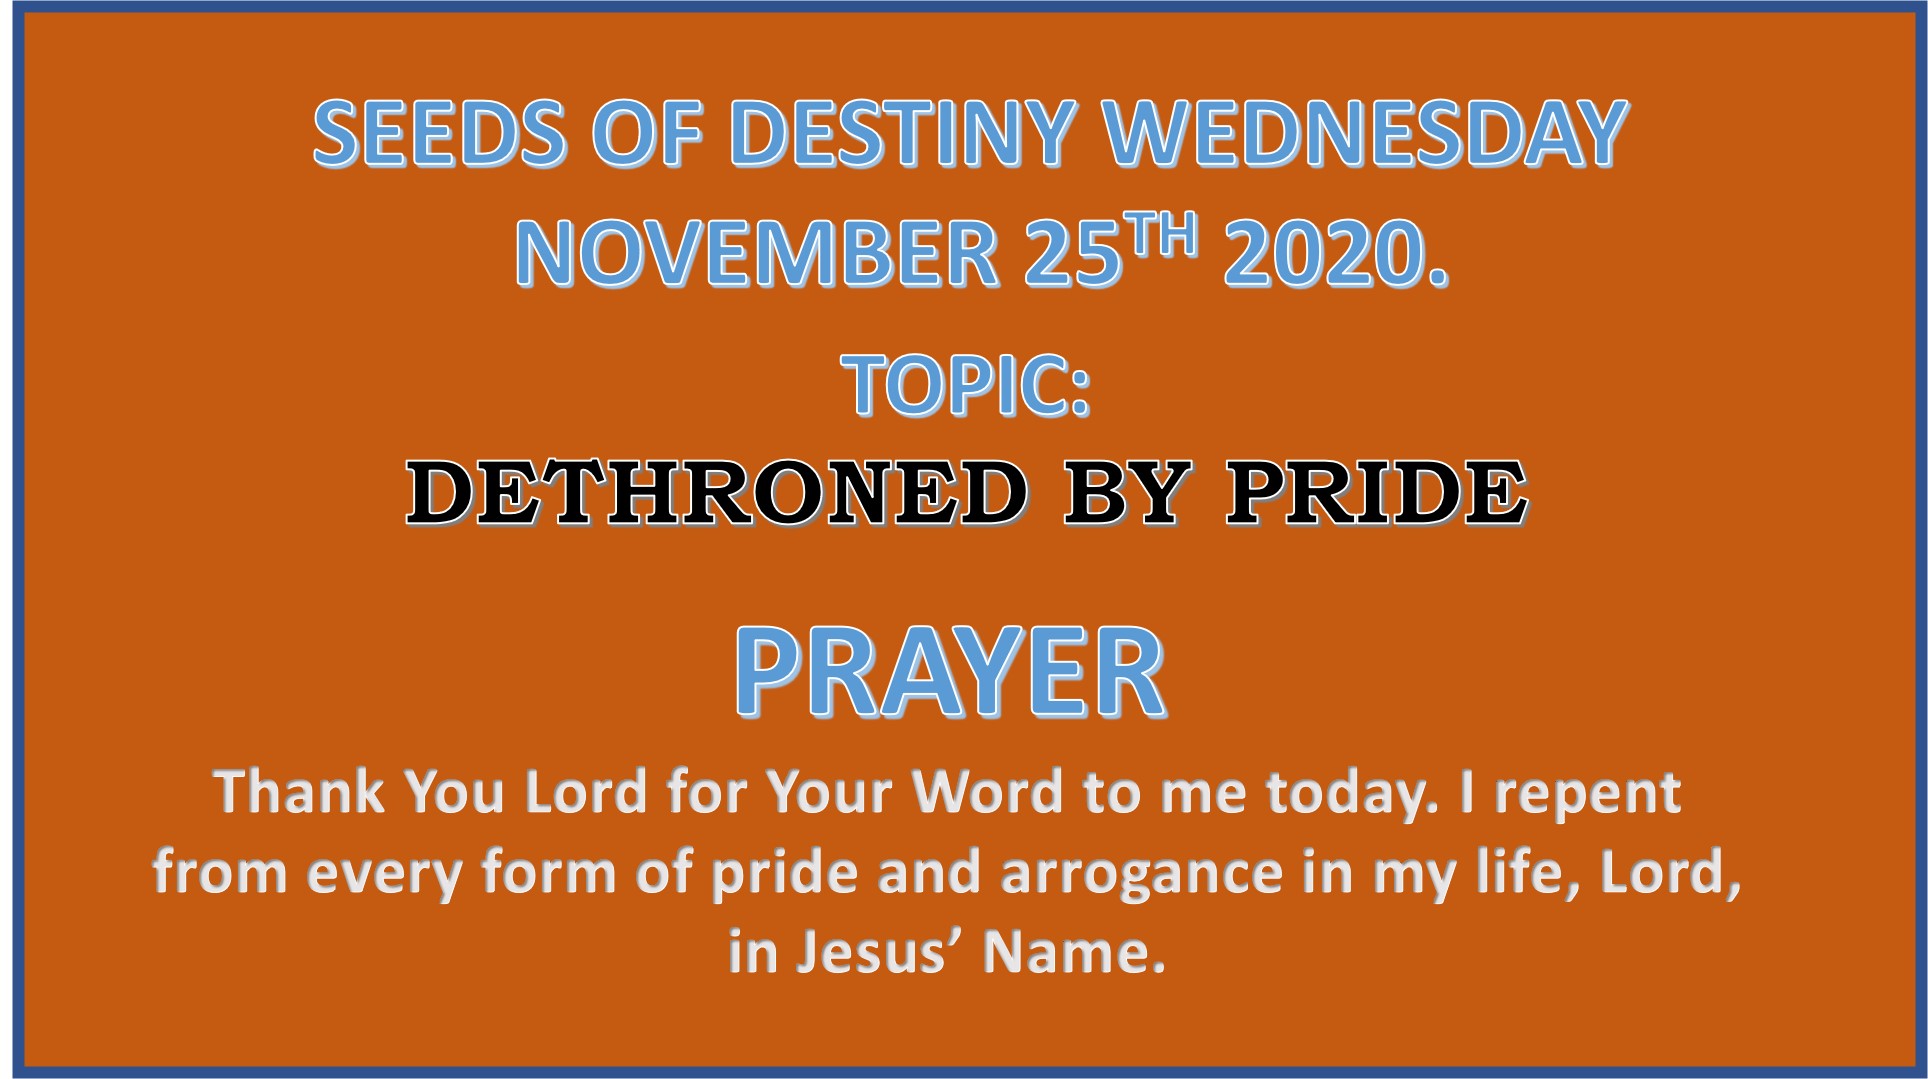 Seeds of Destiny Wednesday 25th November 2020 by Dr Paul Enenche